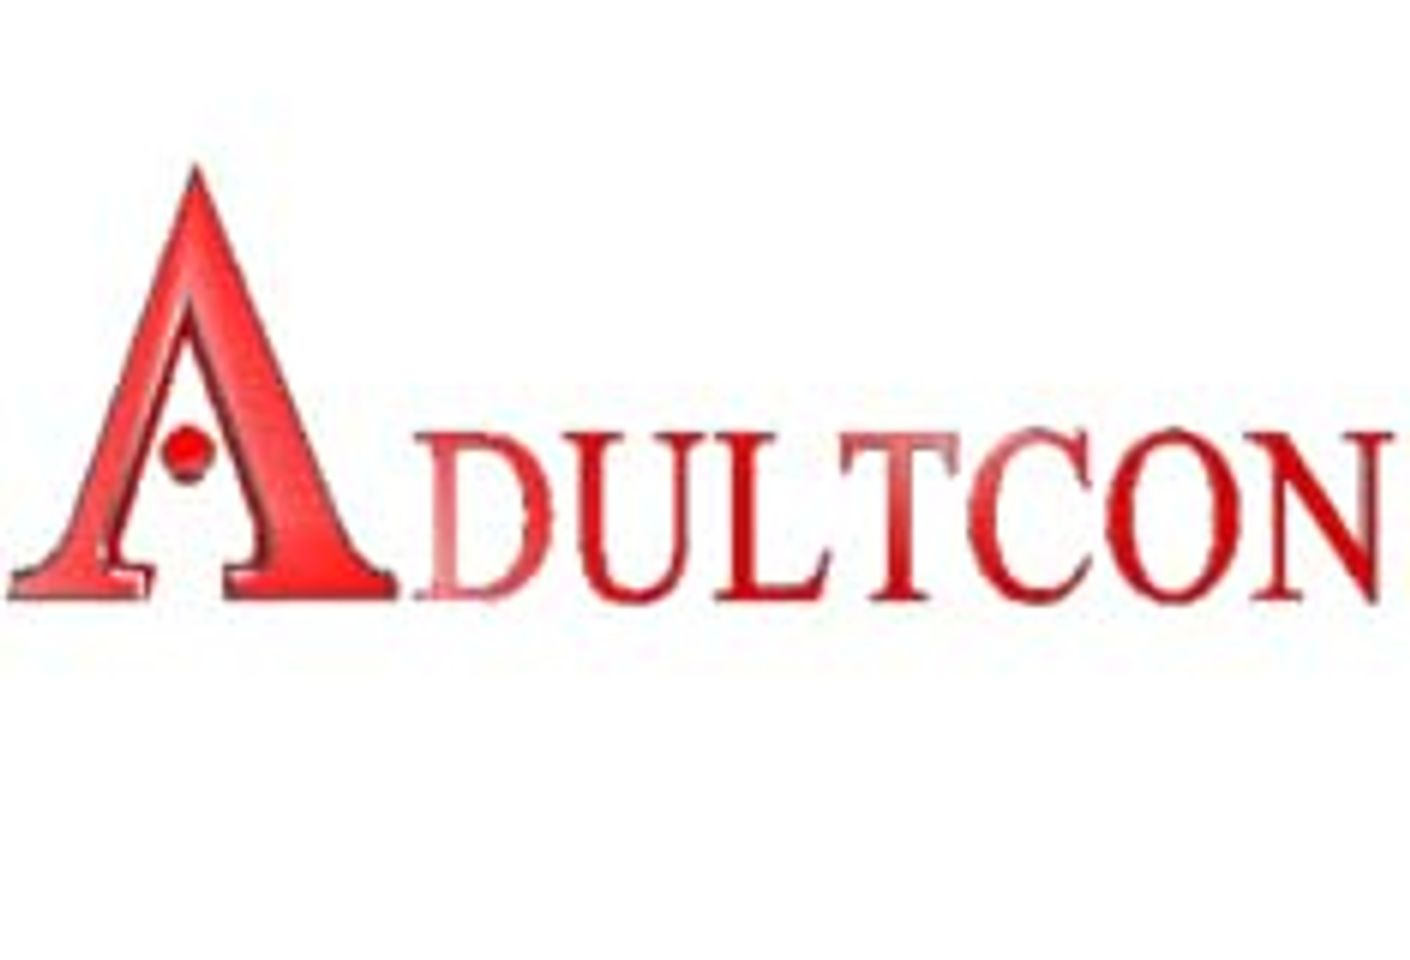 Adultcon Lowers Price of Booth Space in Light of Outbreak